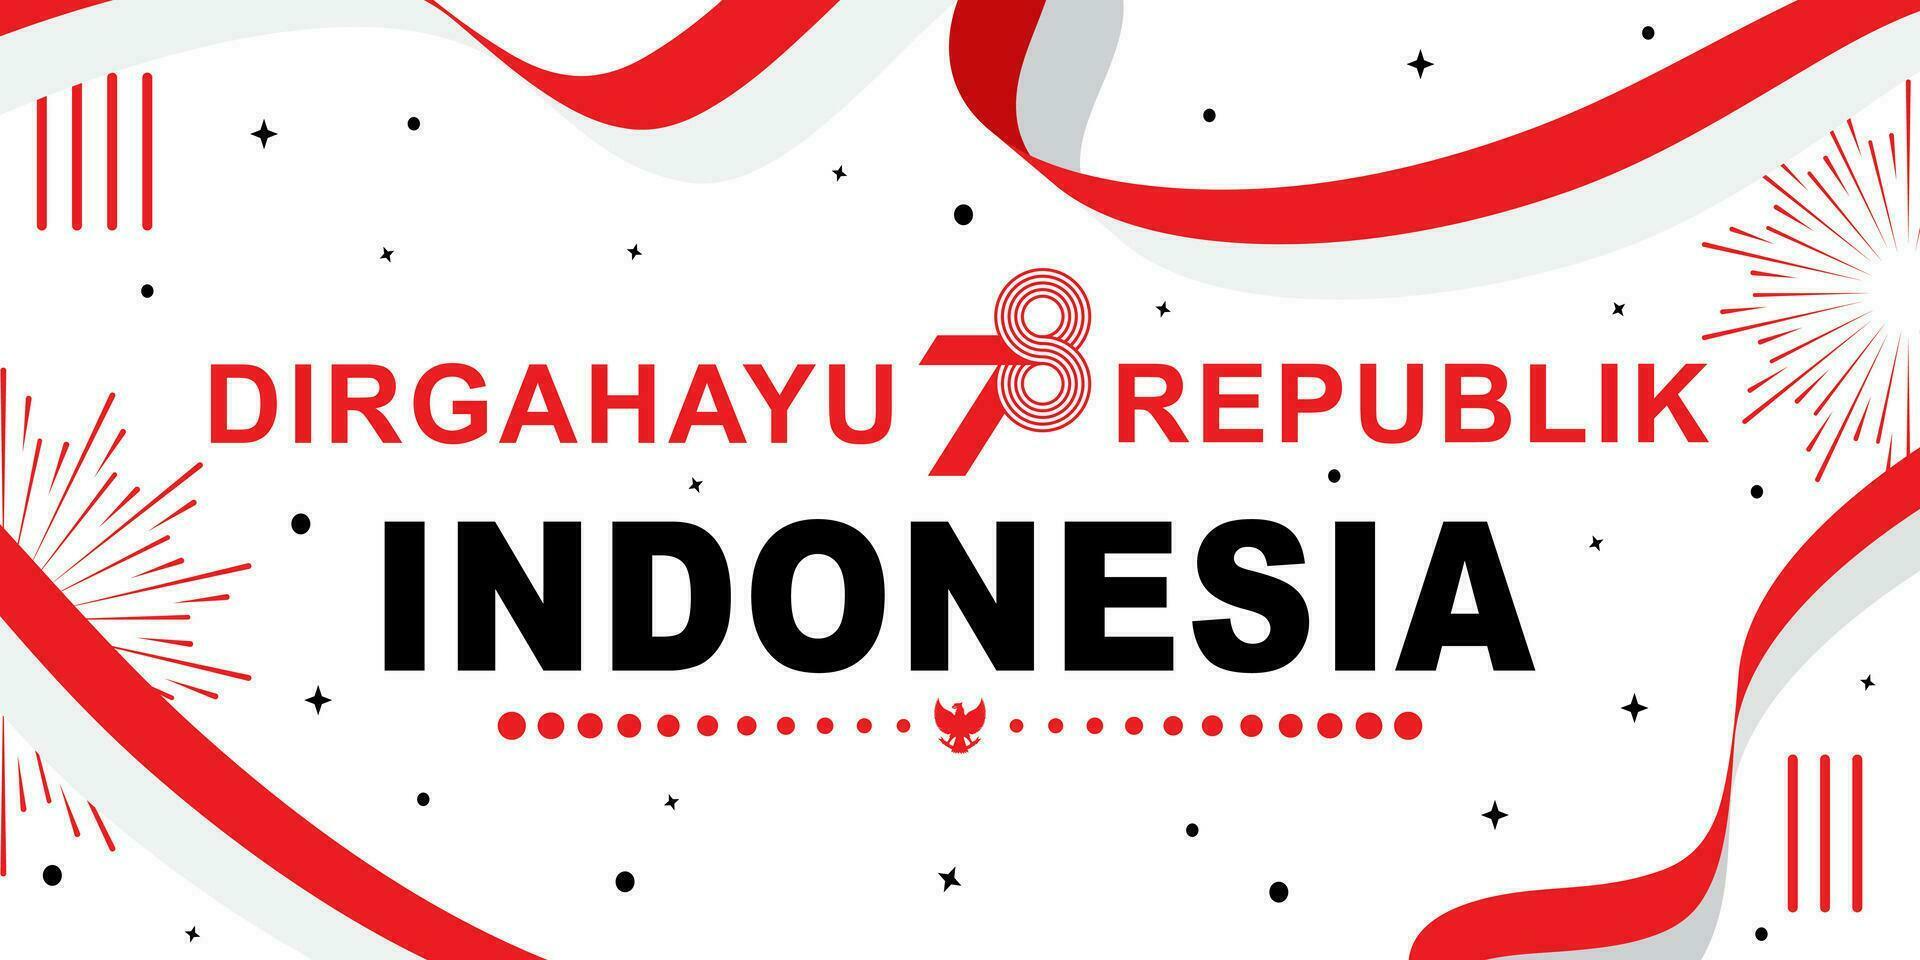 flat cartoon banner design greeting Dirgahayu Republik Indonesia ke-78, which means the 78th Indonesian Independence Day vector